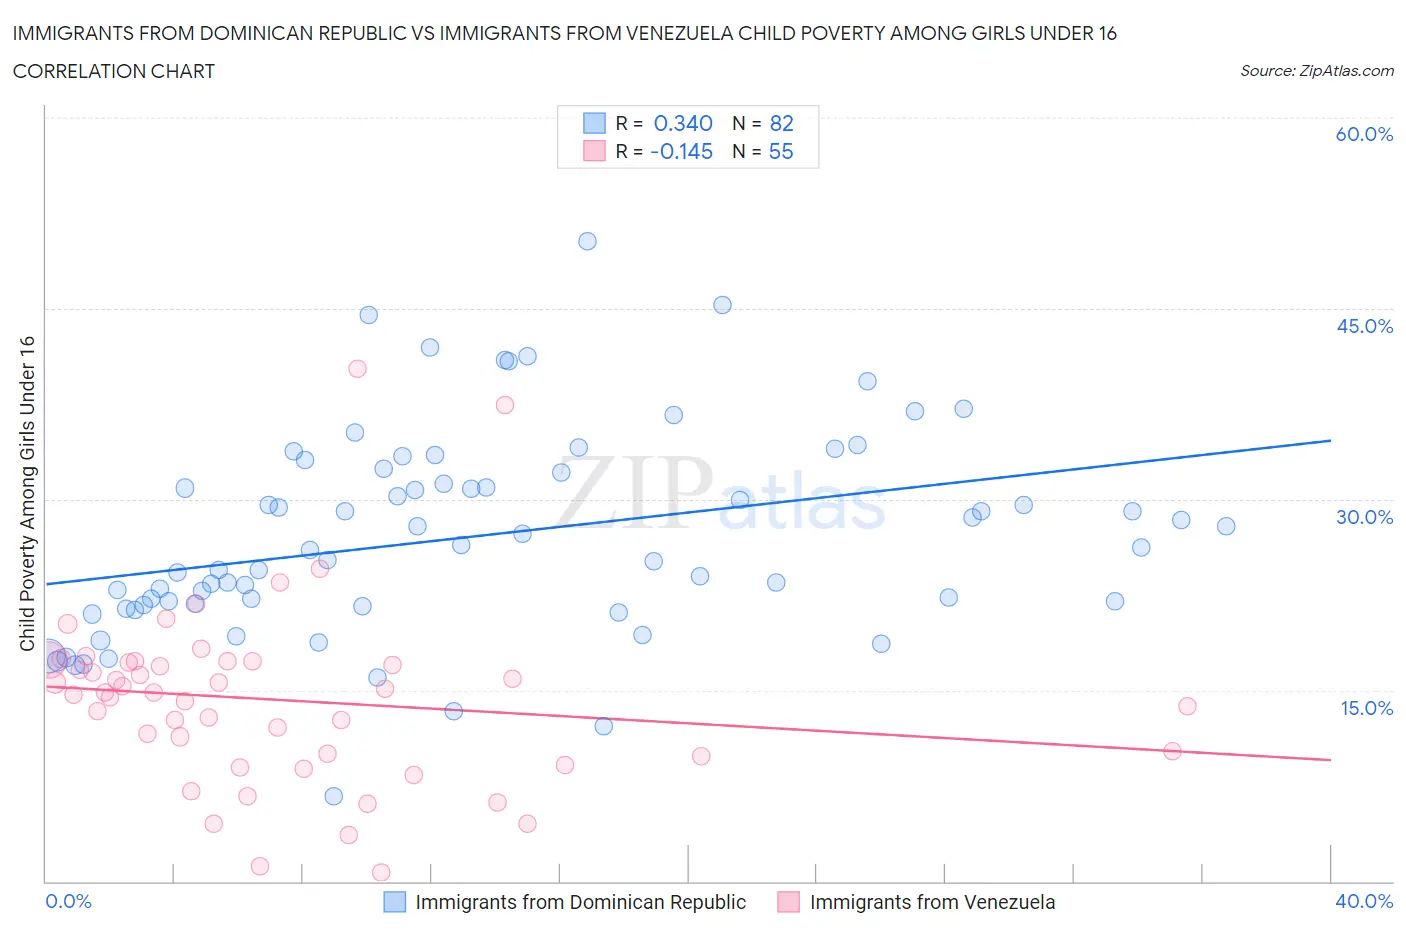 Immigrants from Dominican Republic vs Immigrants from Venezuela Child Poverty Among Girls Under 16